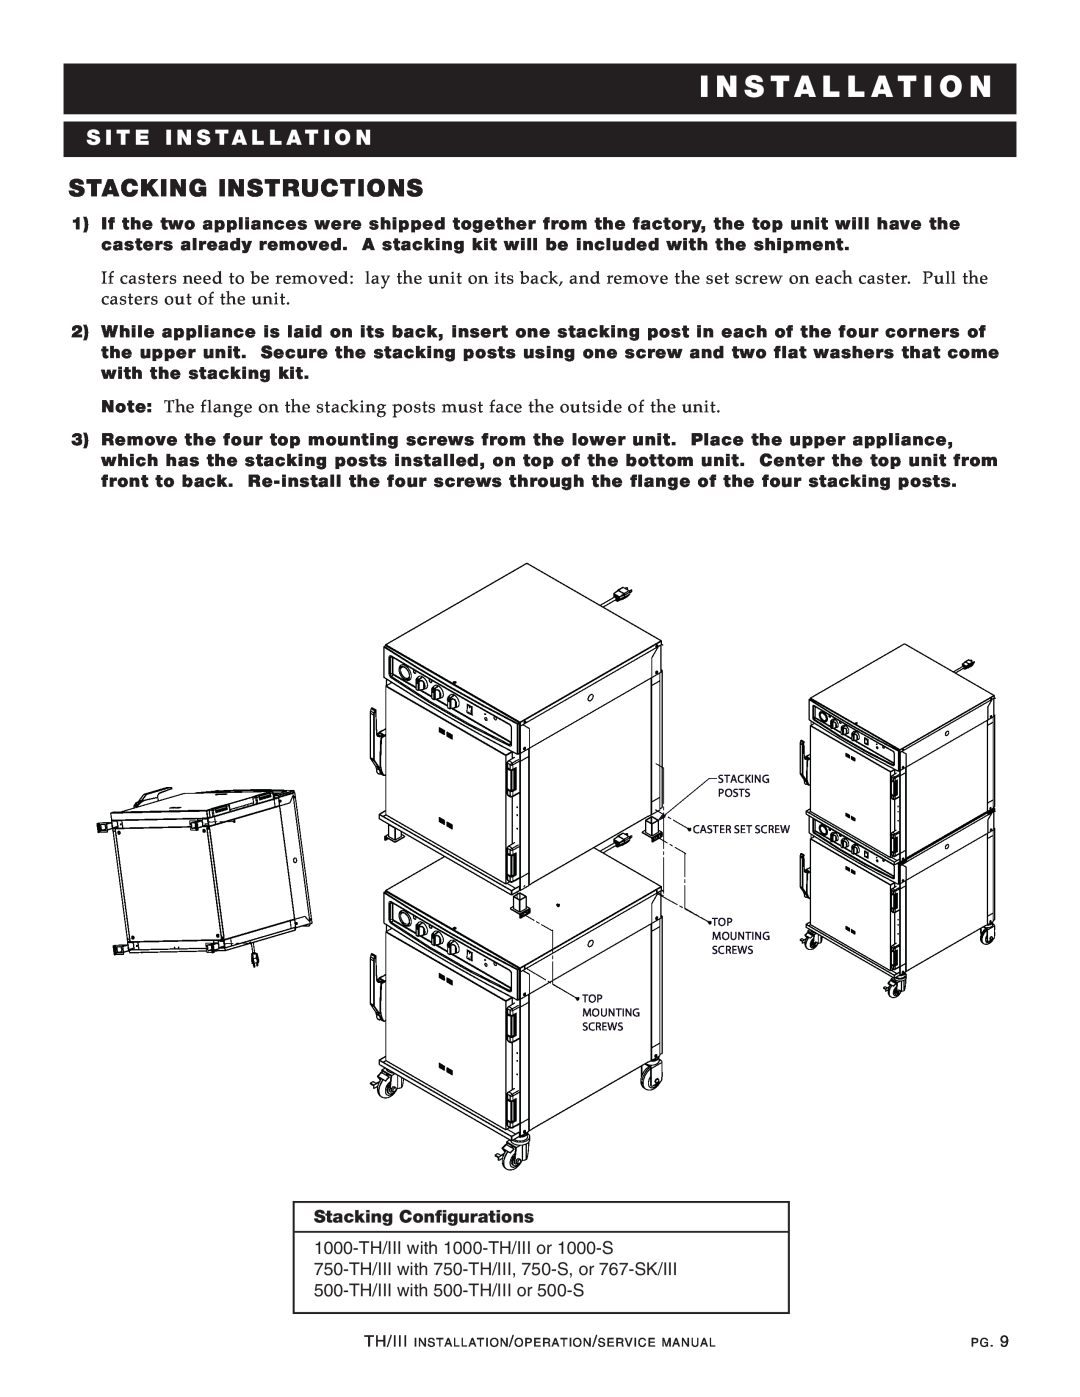 Alto-Shaam 1200-TH/III manual Inst Allatio N, Stacking Instructions, S It E I Nsta Lla T Ion 